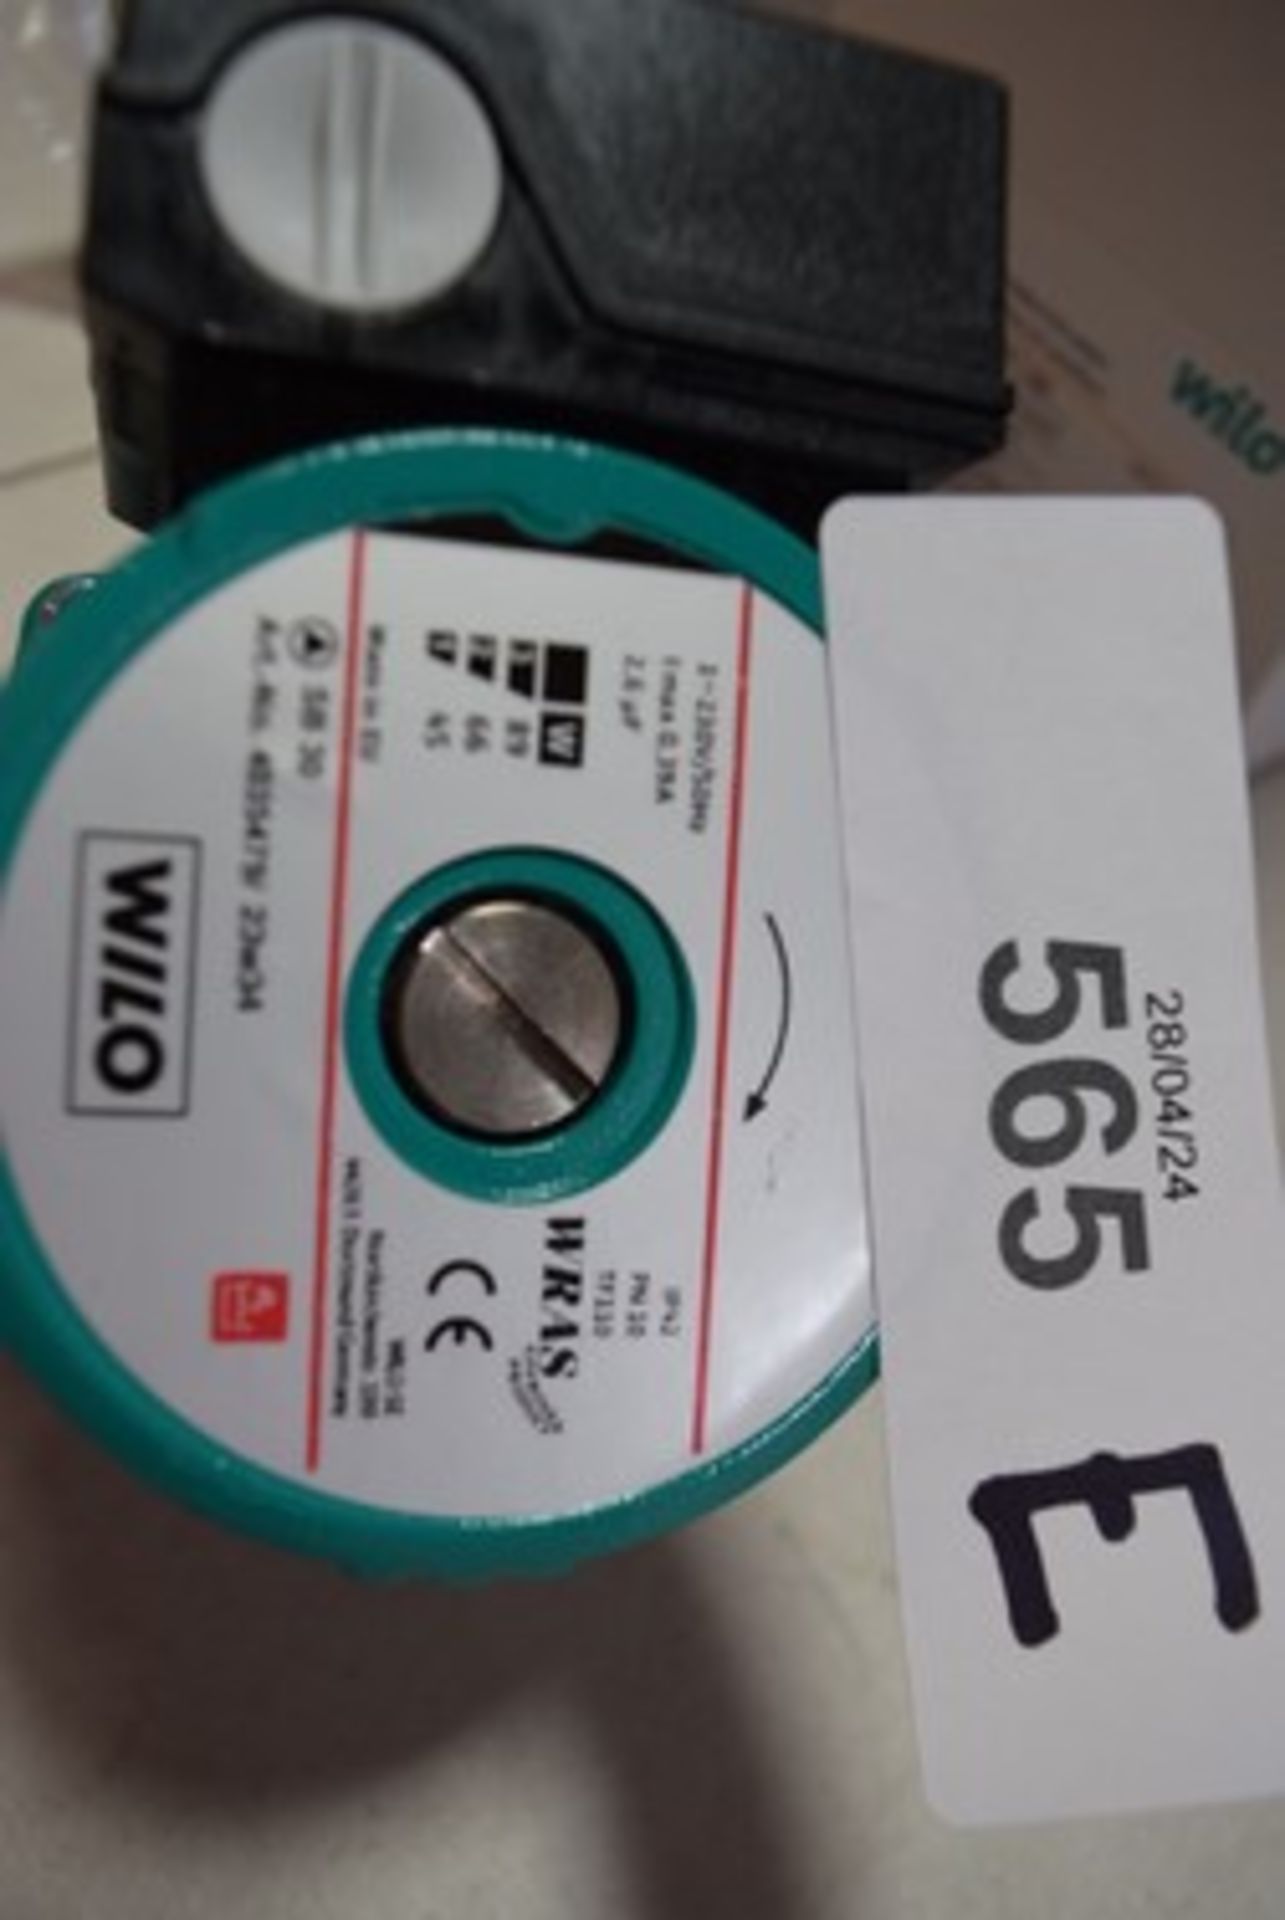 2 x Wilo SB30 secondary circulating pump, item No: 4035479 - new in box (GS30A) - Image 3 of 3